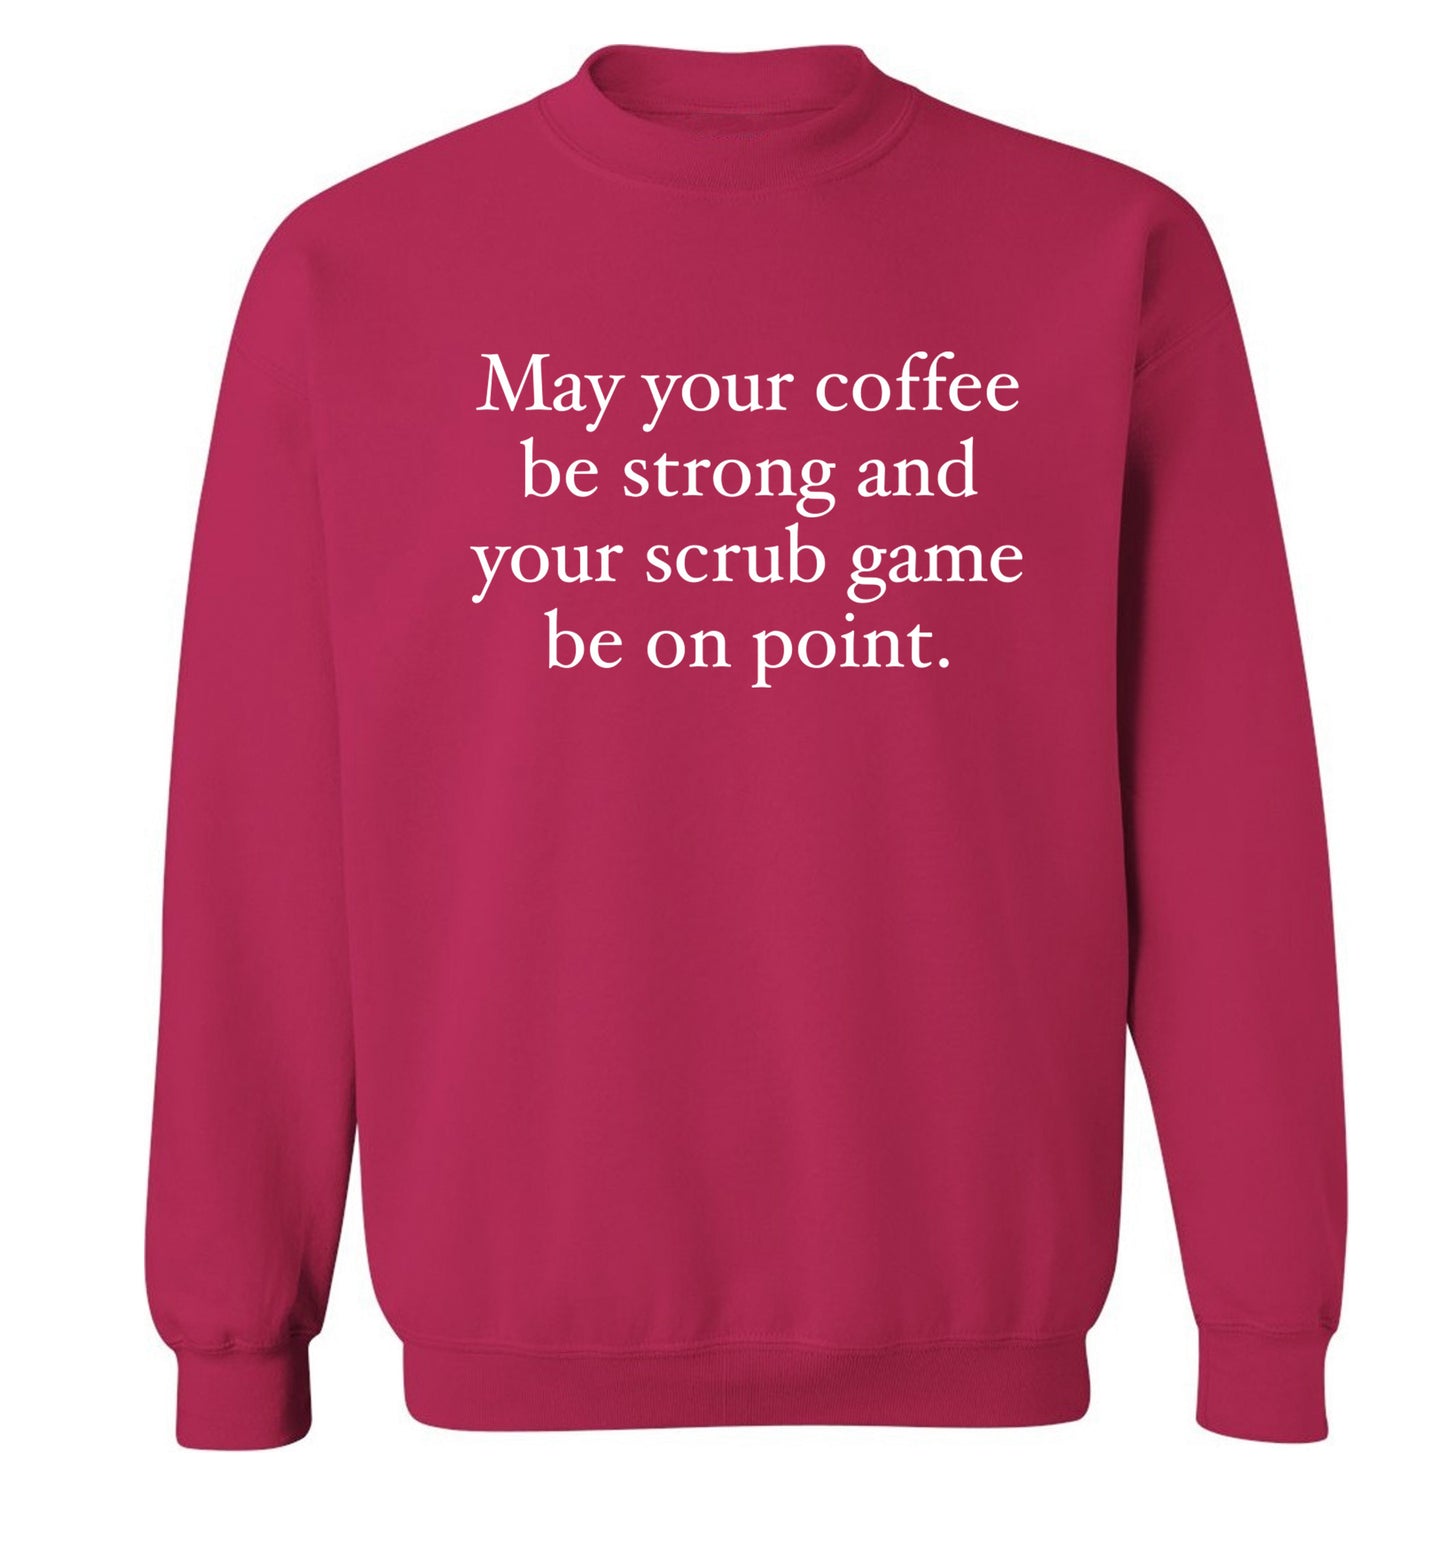 May your caffeine be strong and your scrub game be on point Adult's unisex pink Sweater 2XL